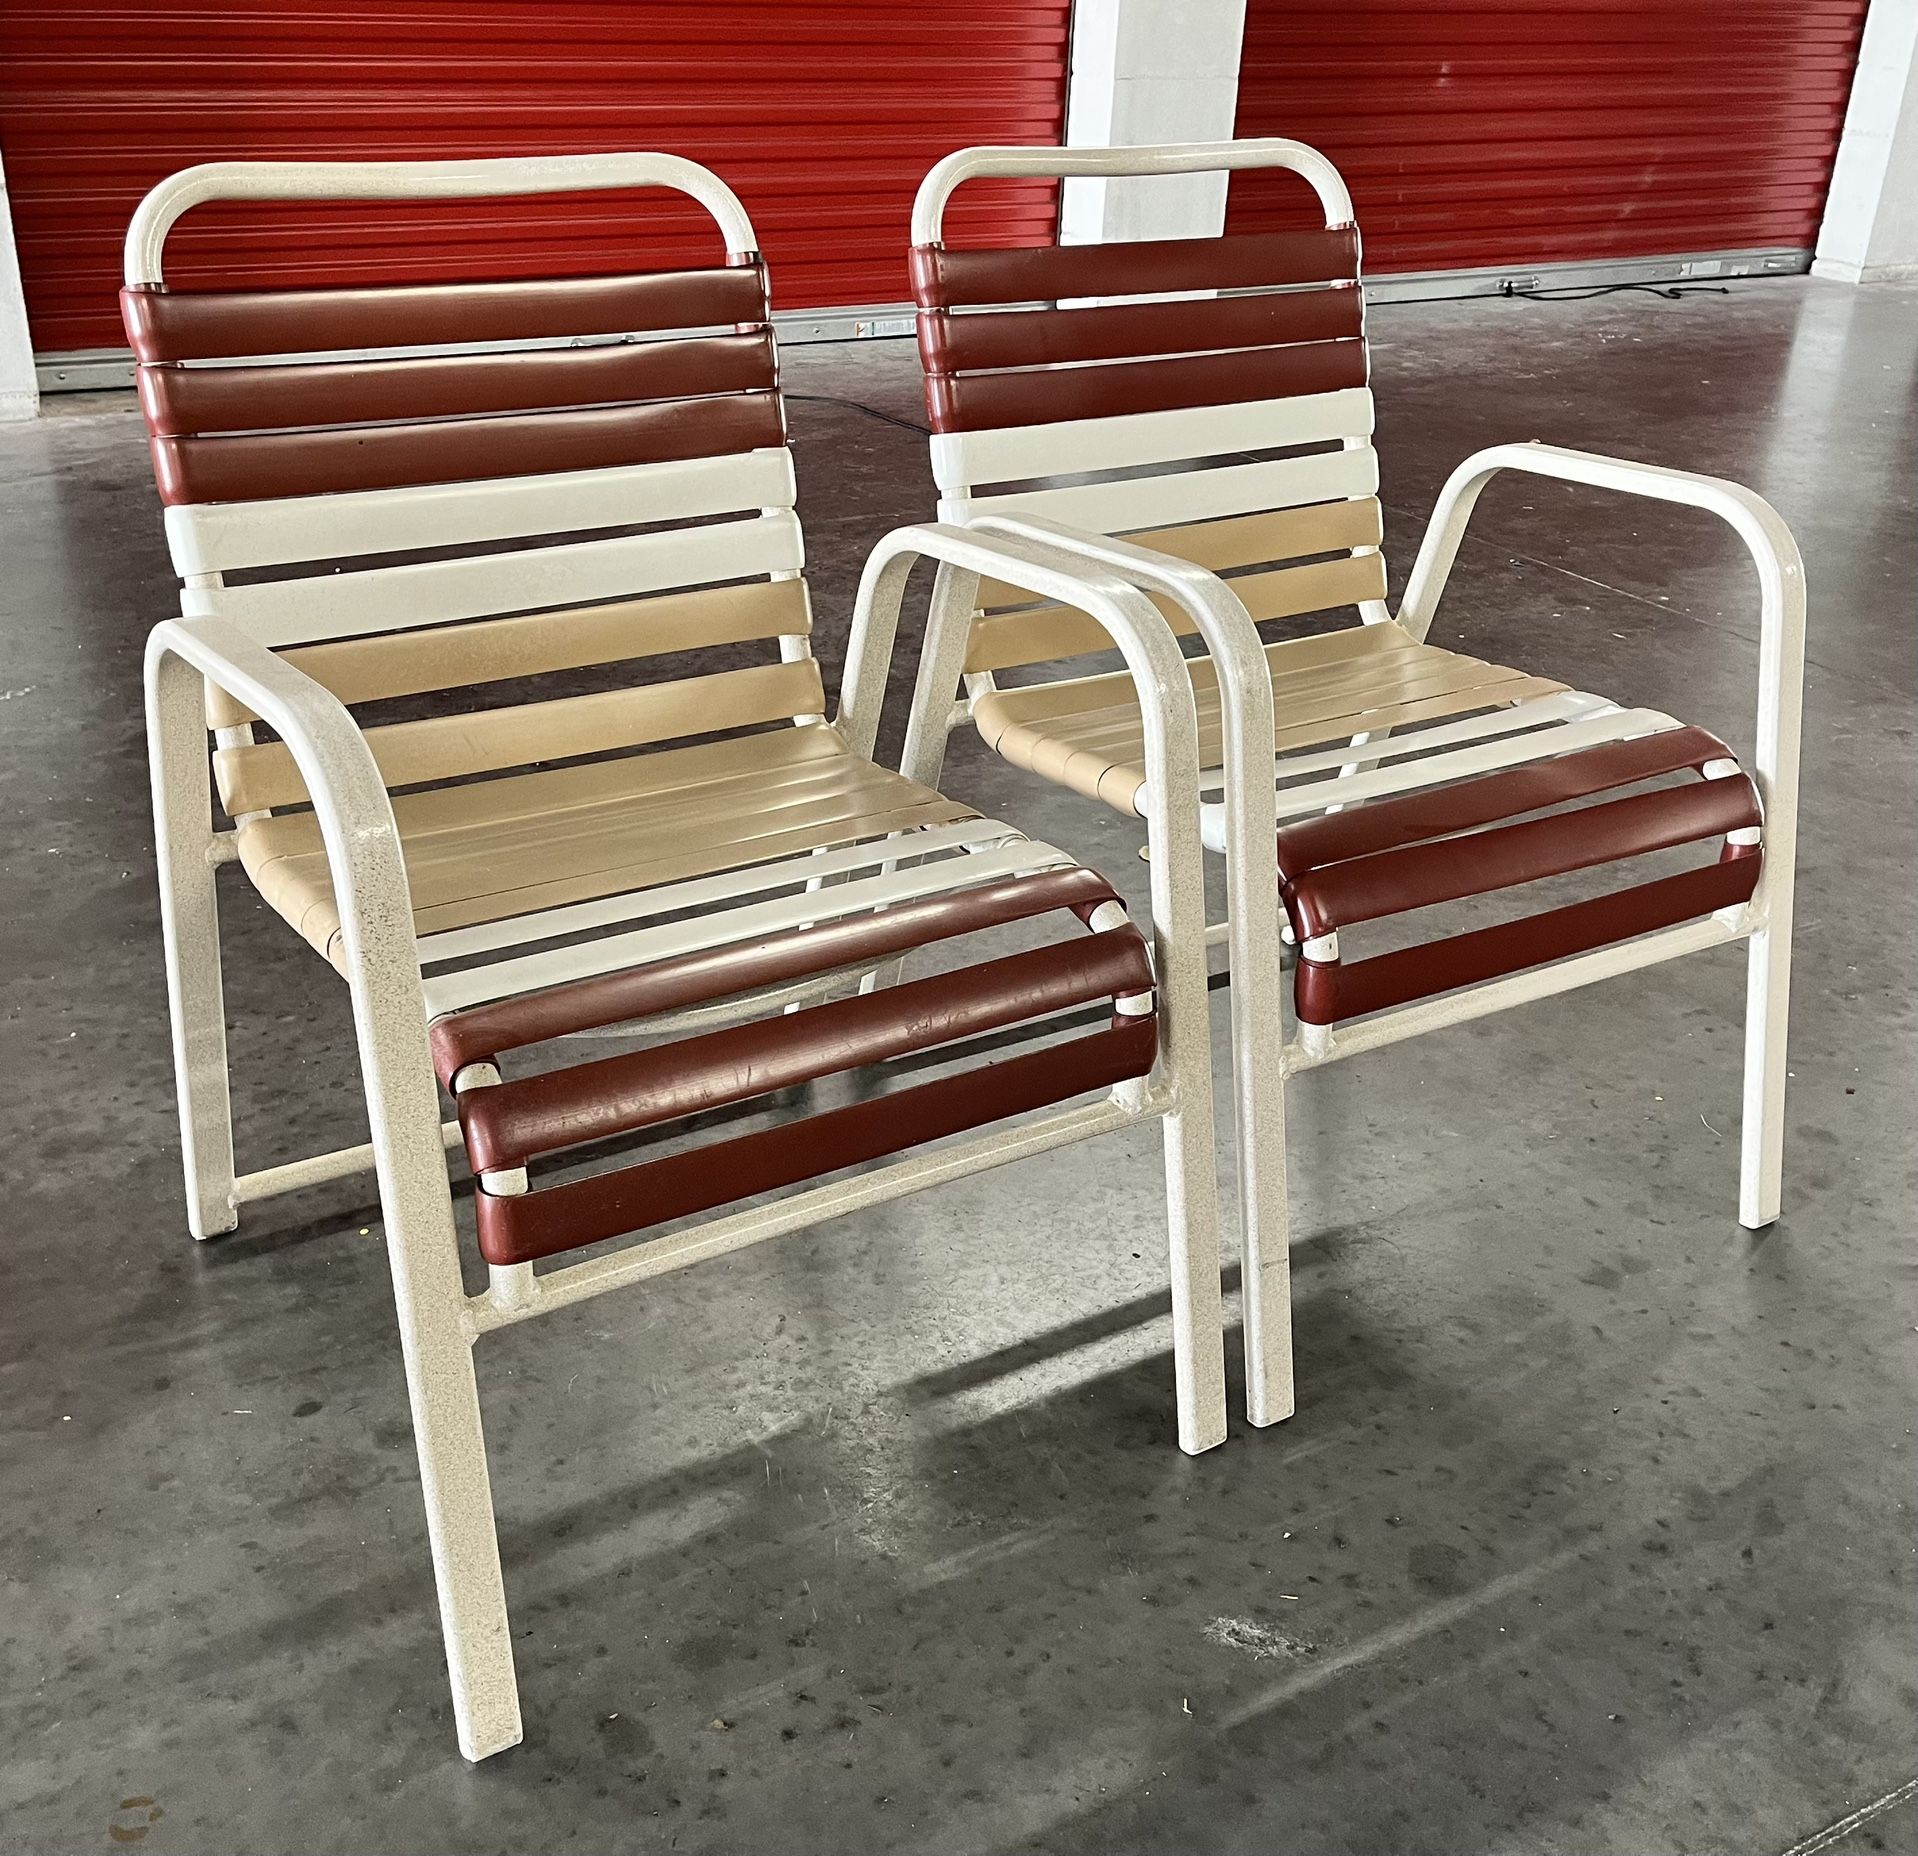 $40 for (2) Retro Style Aluminum Patio/Outdoor Chairs - Commercial Grade